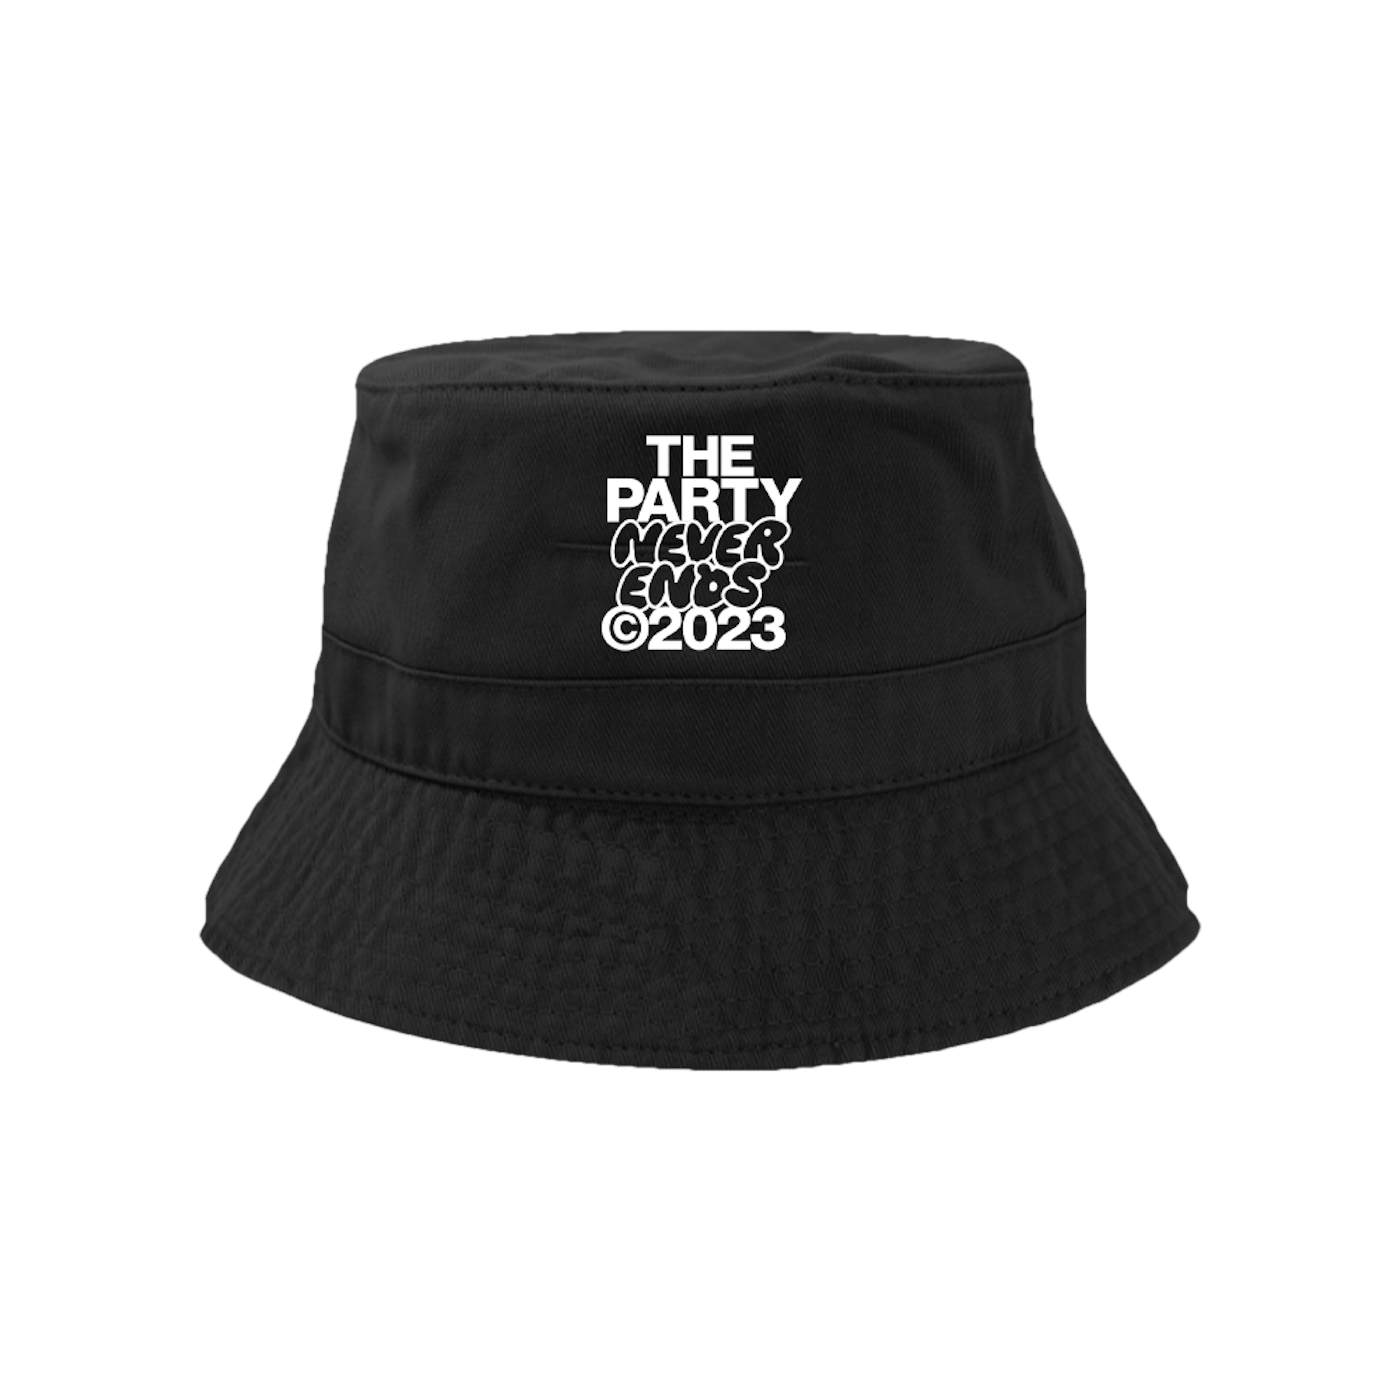 The Chainsmokers The Party Never Ends - Embroidered Bucket Hat